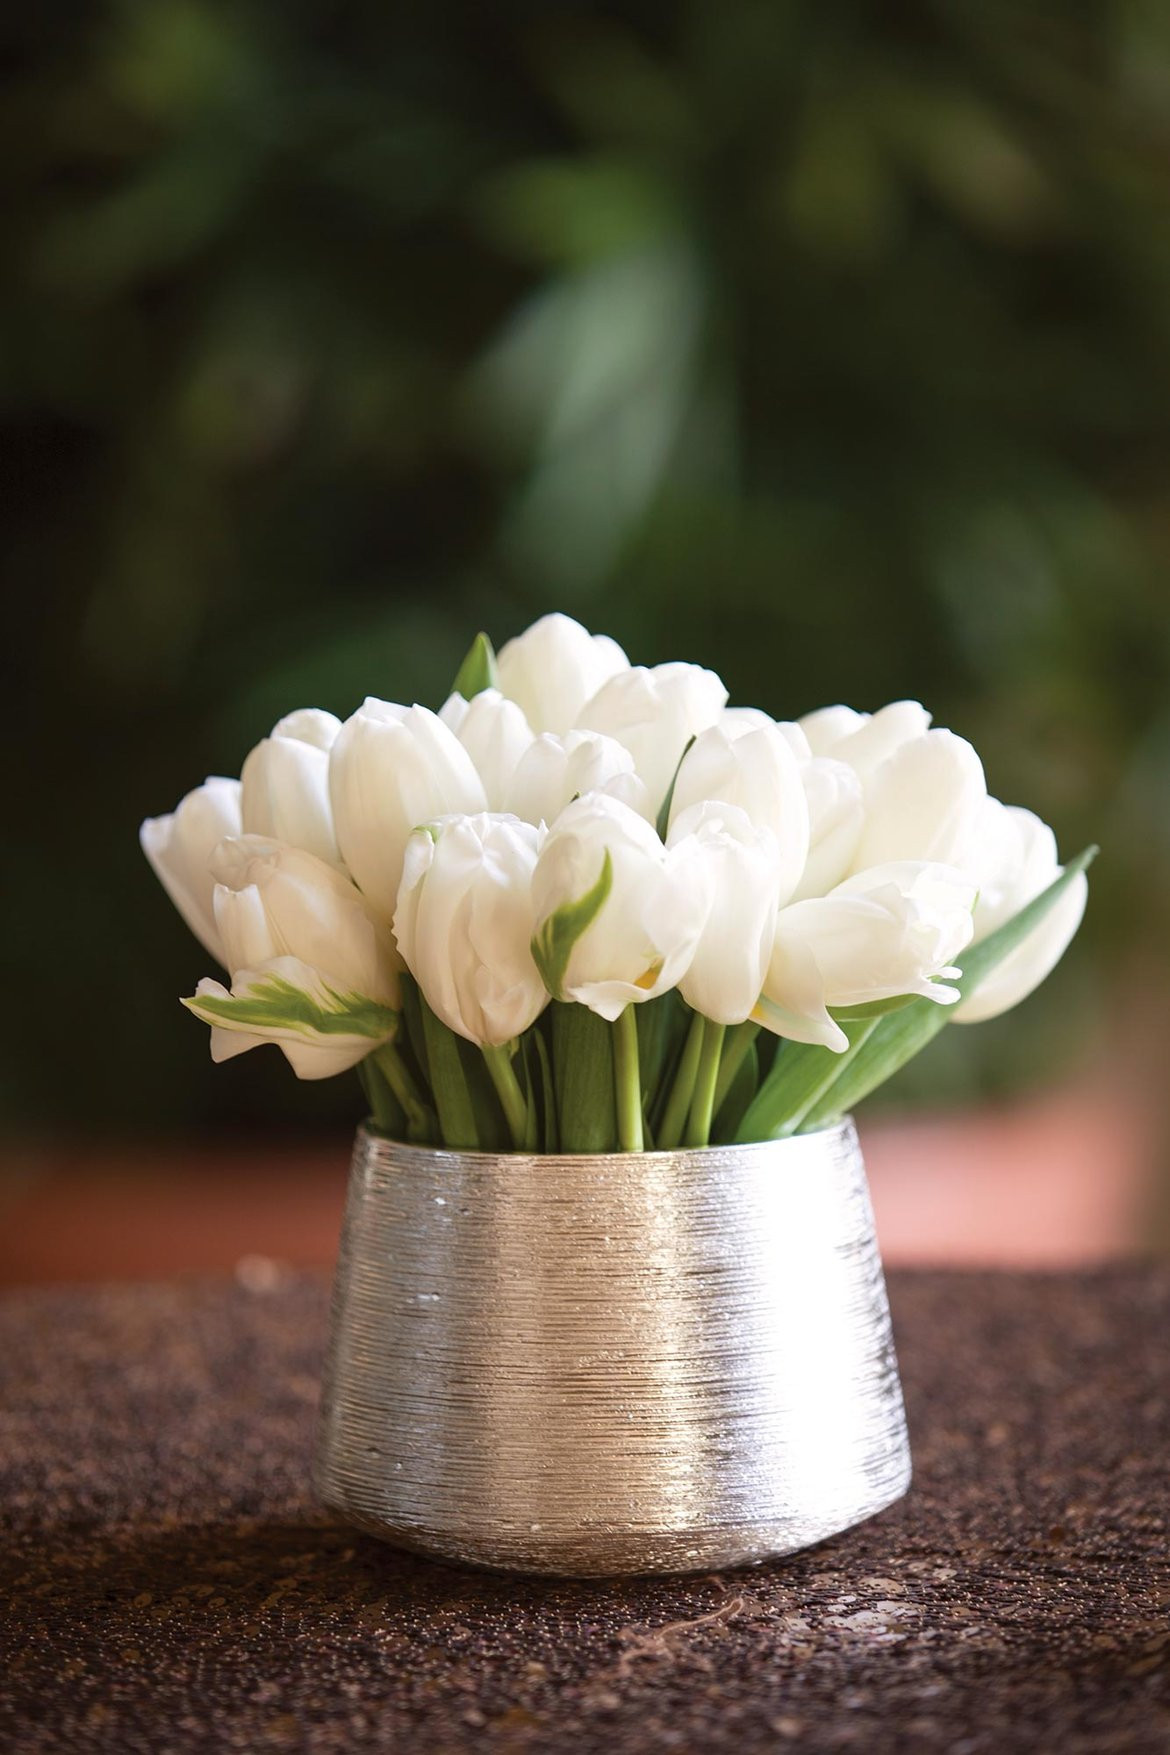 White Flower Wedding Centerpieces
 The Hottest New Wedding Trends for 2016 BridalGuide